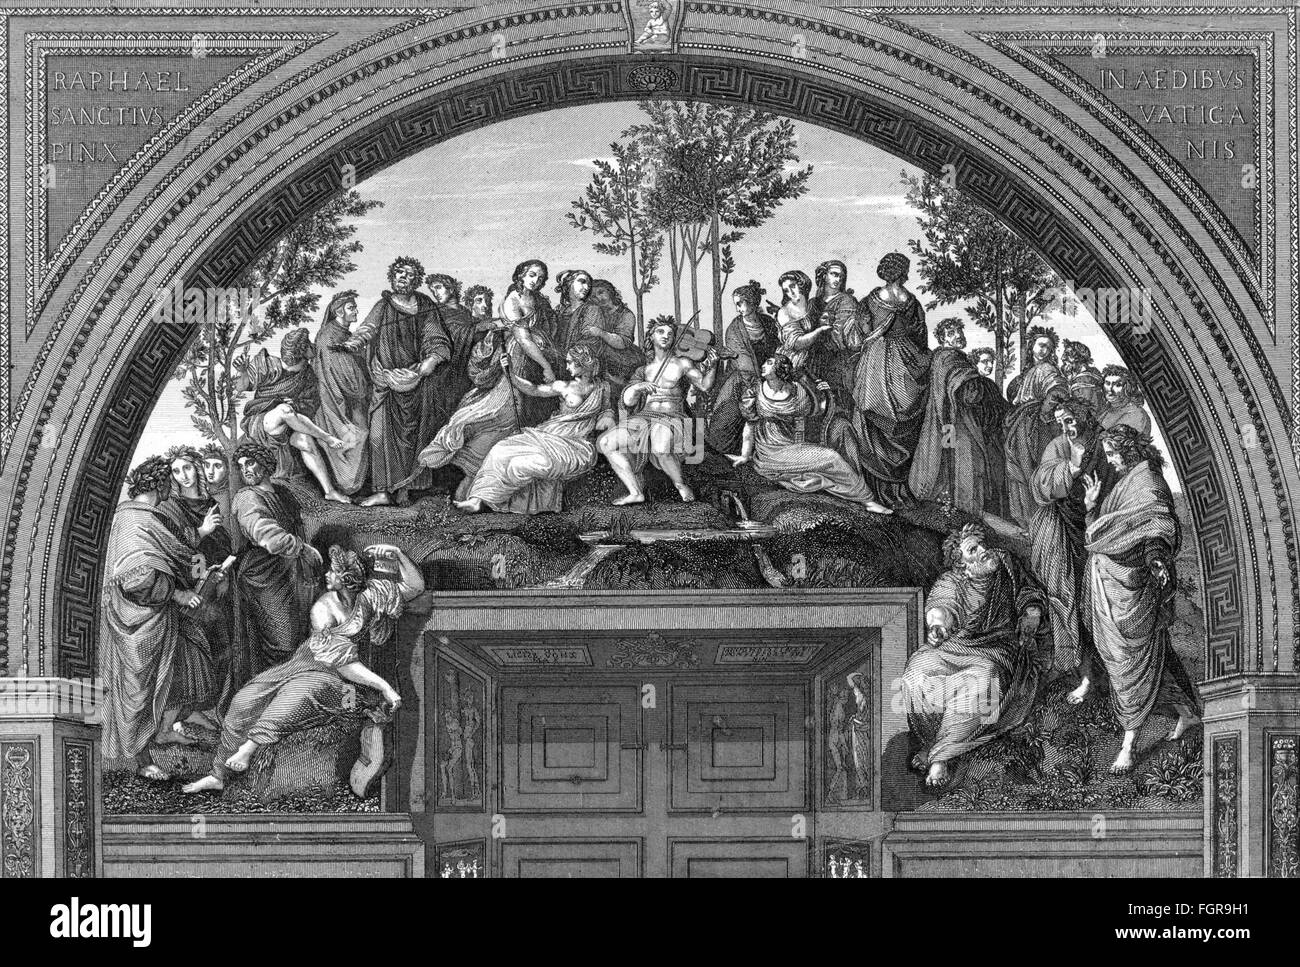 literature, allegories, 'Mount Parnassus', after painting by Raphael (1483 - 1520), wood engraving by A.C.Payne, 19th century, Additional-Rights-Clearences-Not Available Stock Photo